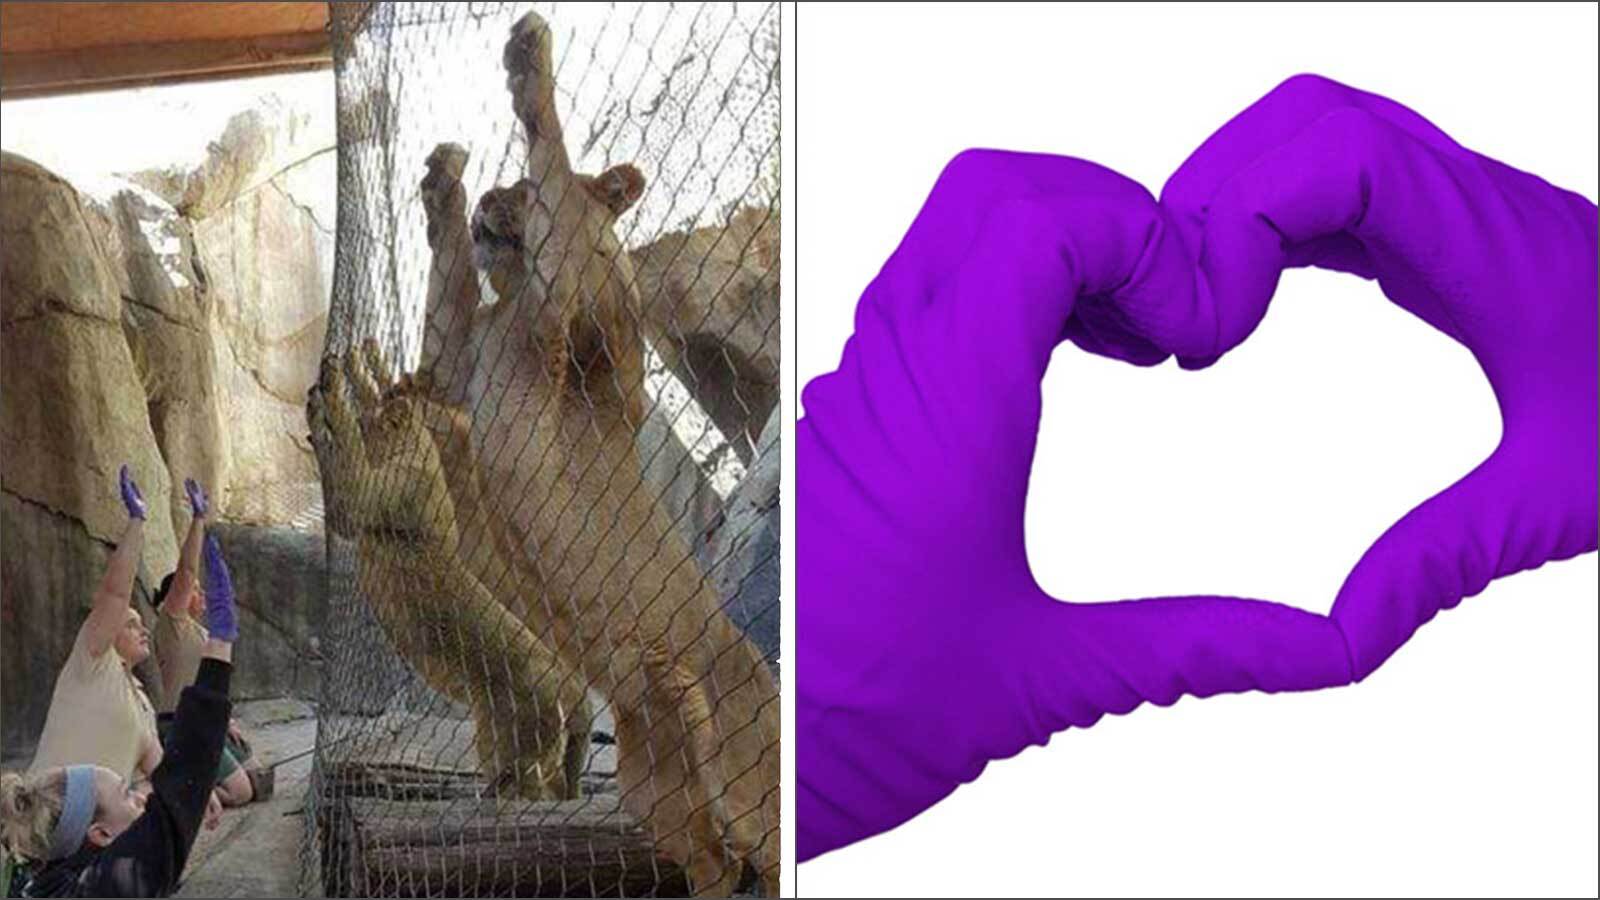 People in a zoo interacting with lions while wearing purple gloves. A pair of hands wearing purple gloves forming a heart